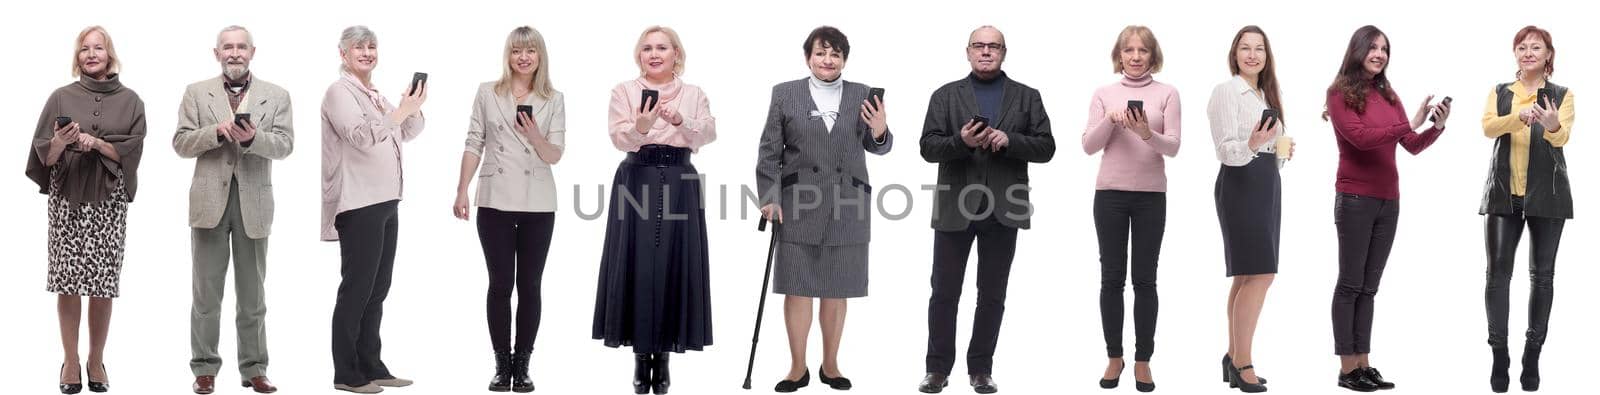 group of people holding phone in hand and looking at camera isolated on white background